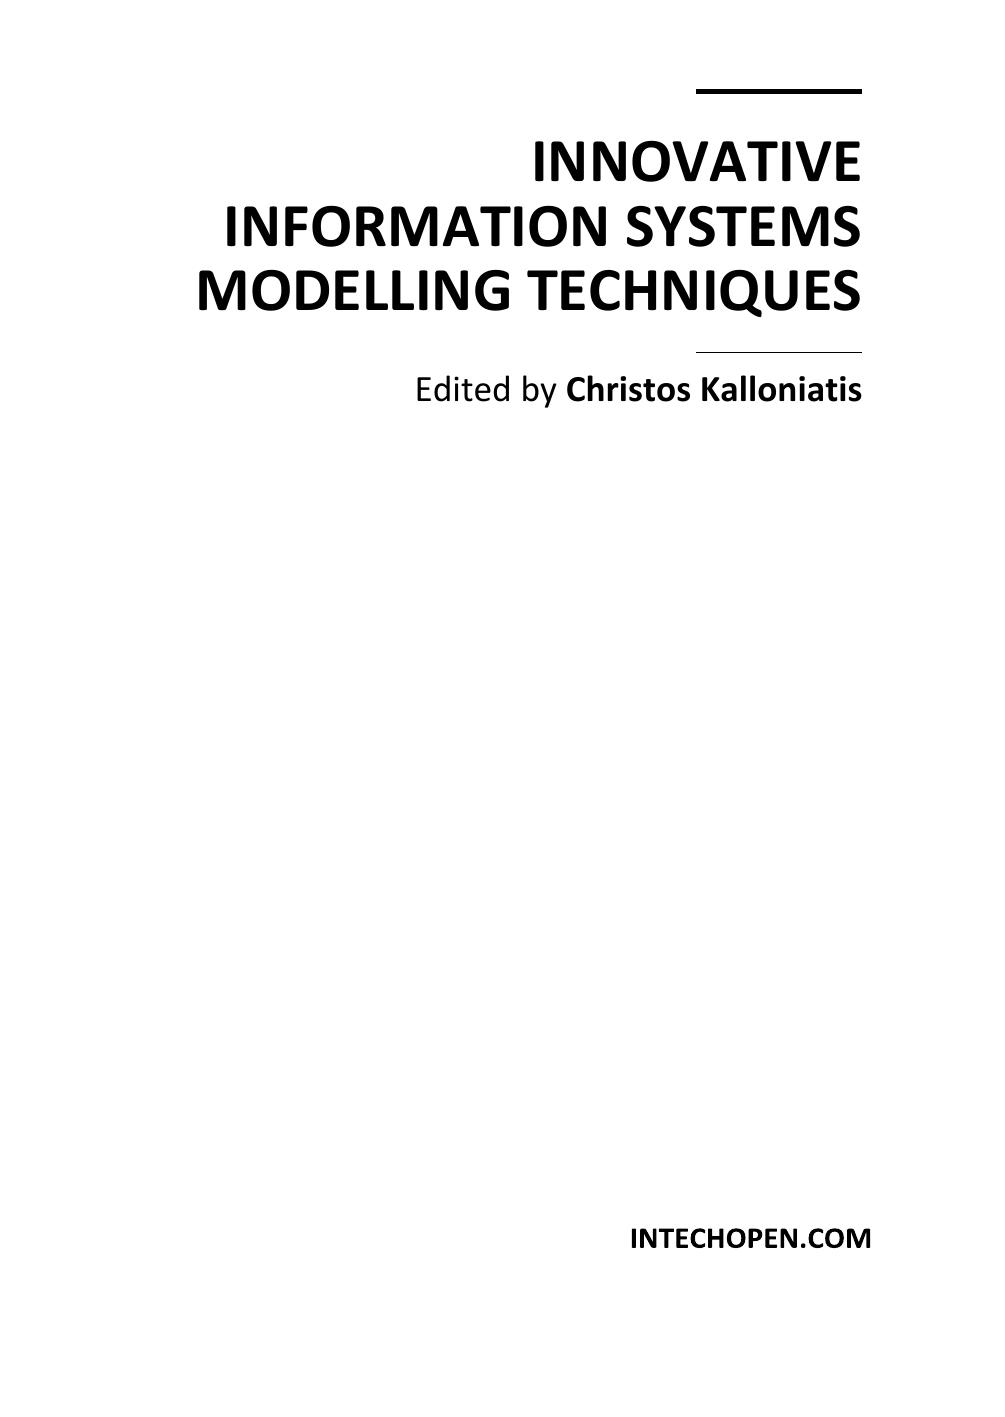 Innovative Information Systems Modelling Techniques 2012.pdf